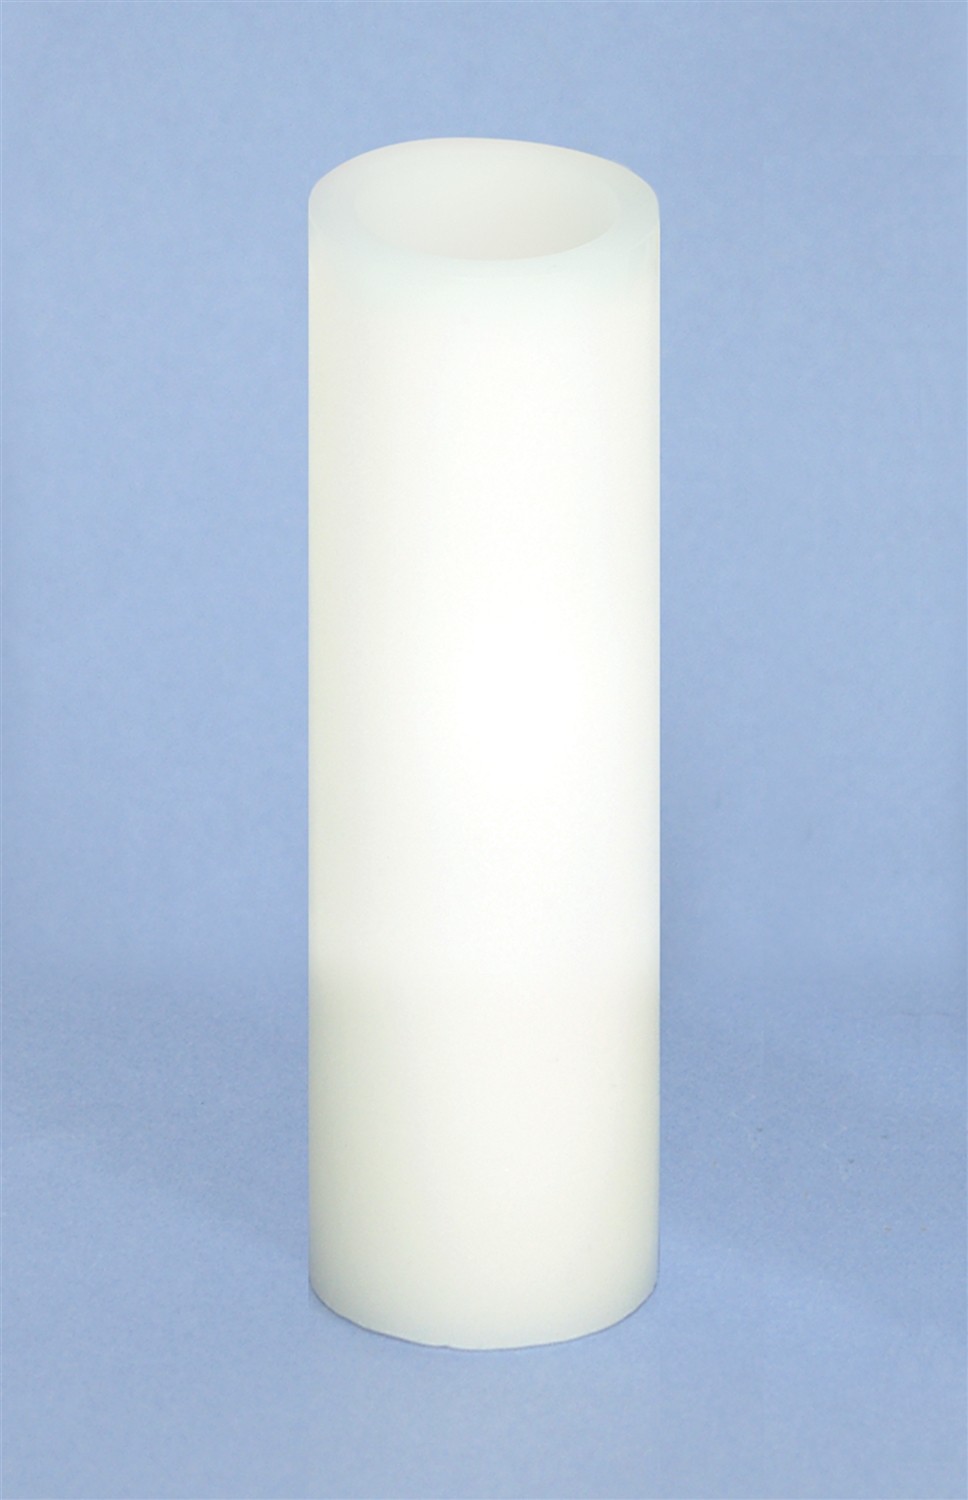 LED Wax Pillar Candle (Set of 6 ) 1.75"Dx6"H Wax/Plastic - 2 AA Batteries Not Incld